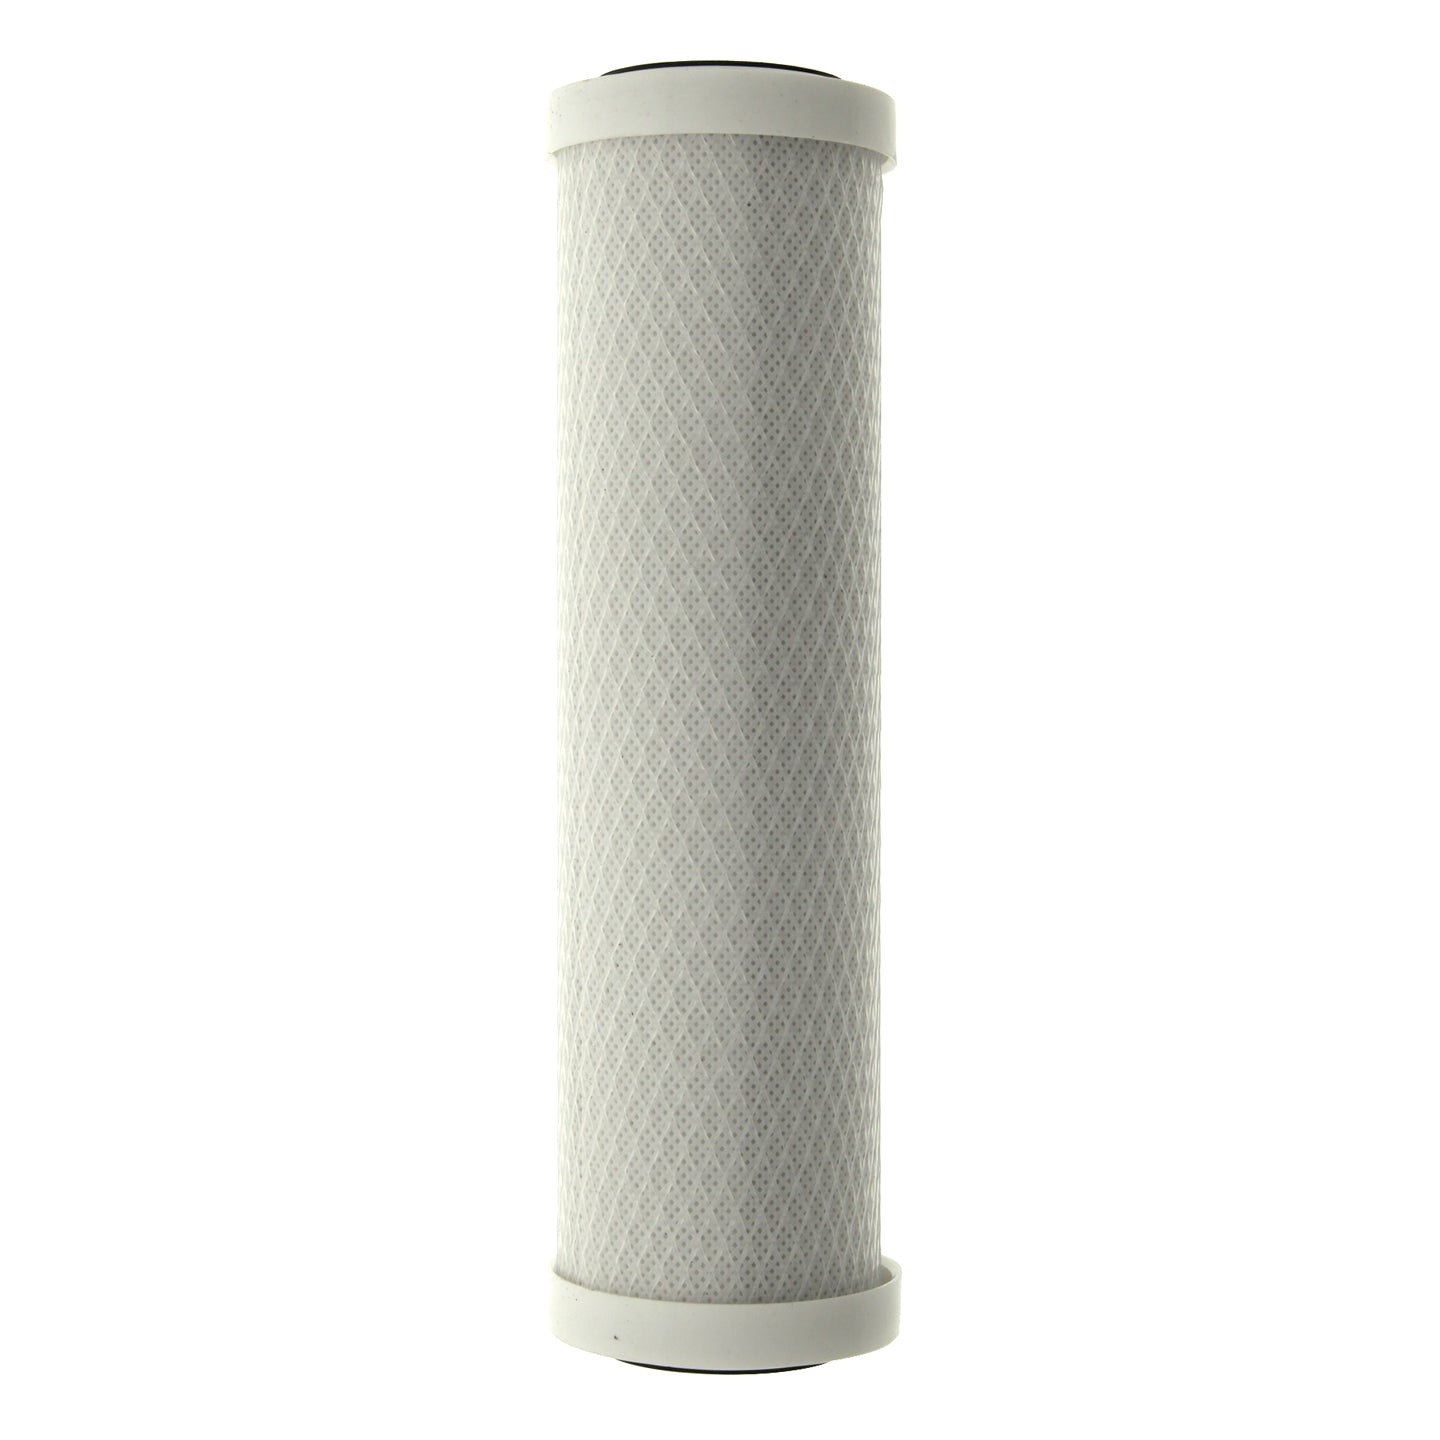 MAXETW-975 Watts C-MAX Replacement Filter Cartridge (alternate)